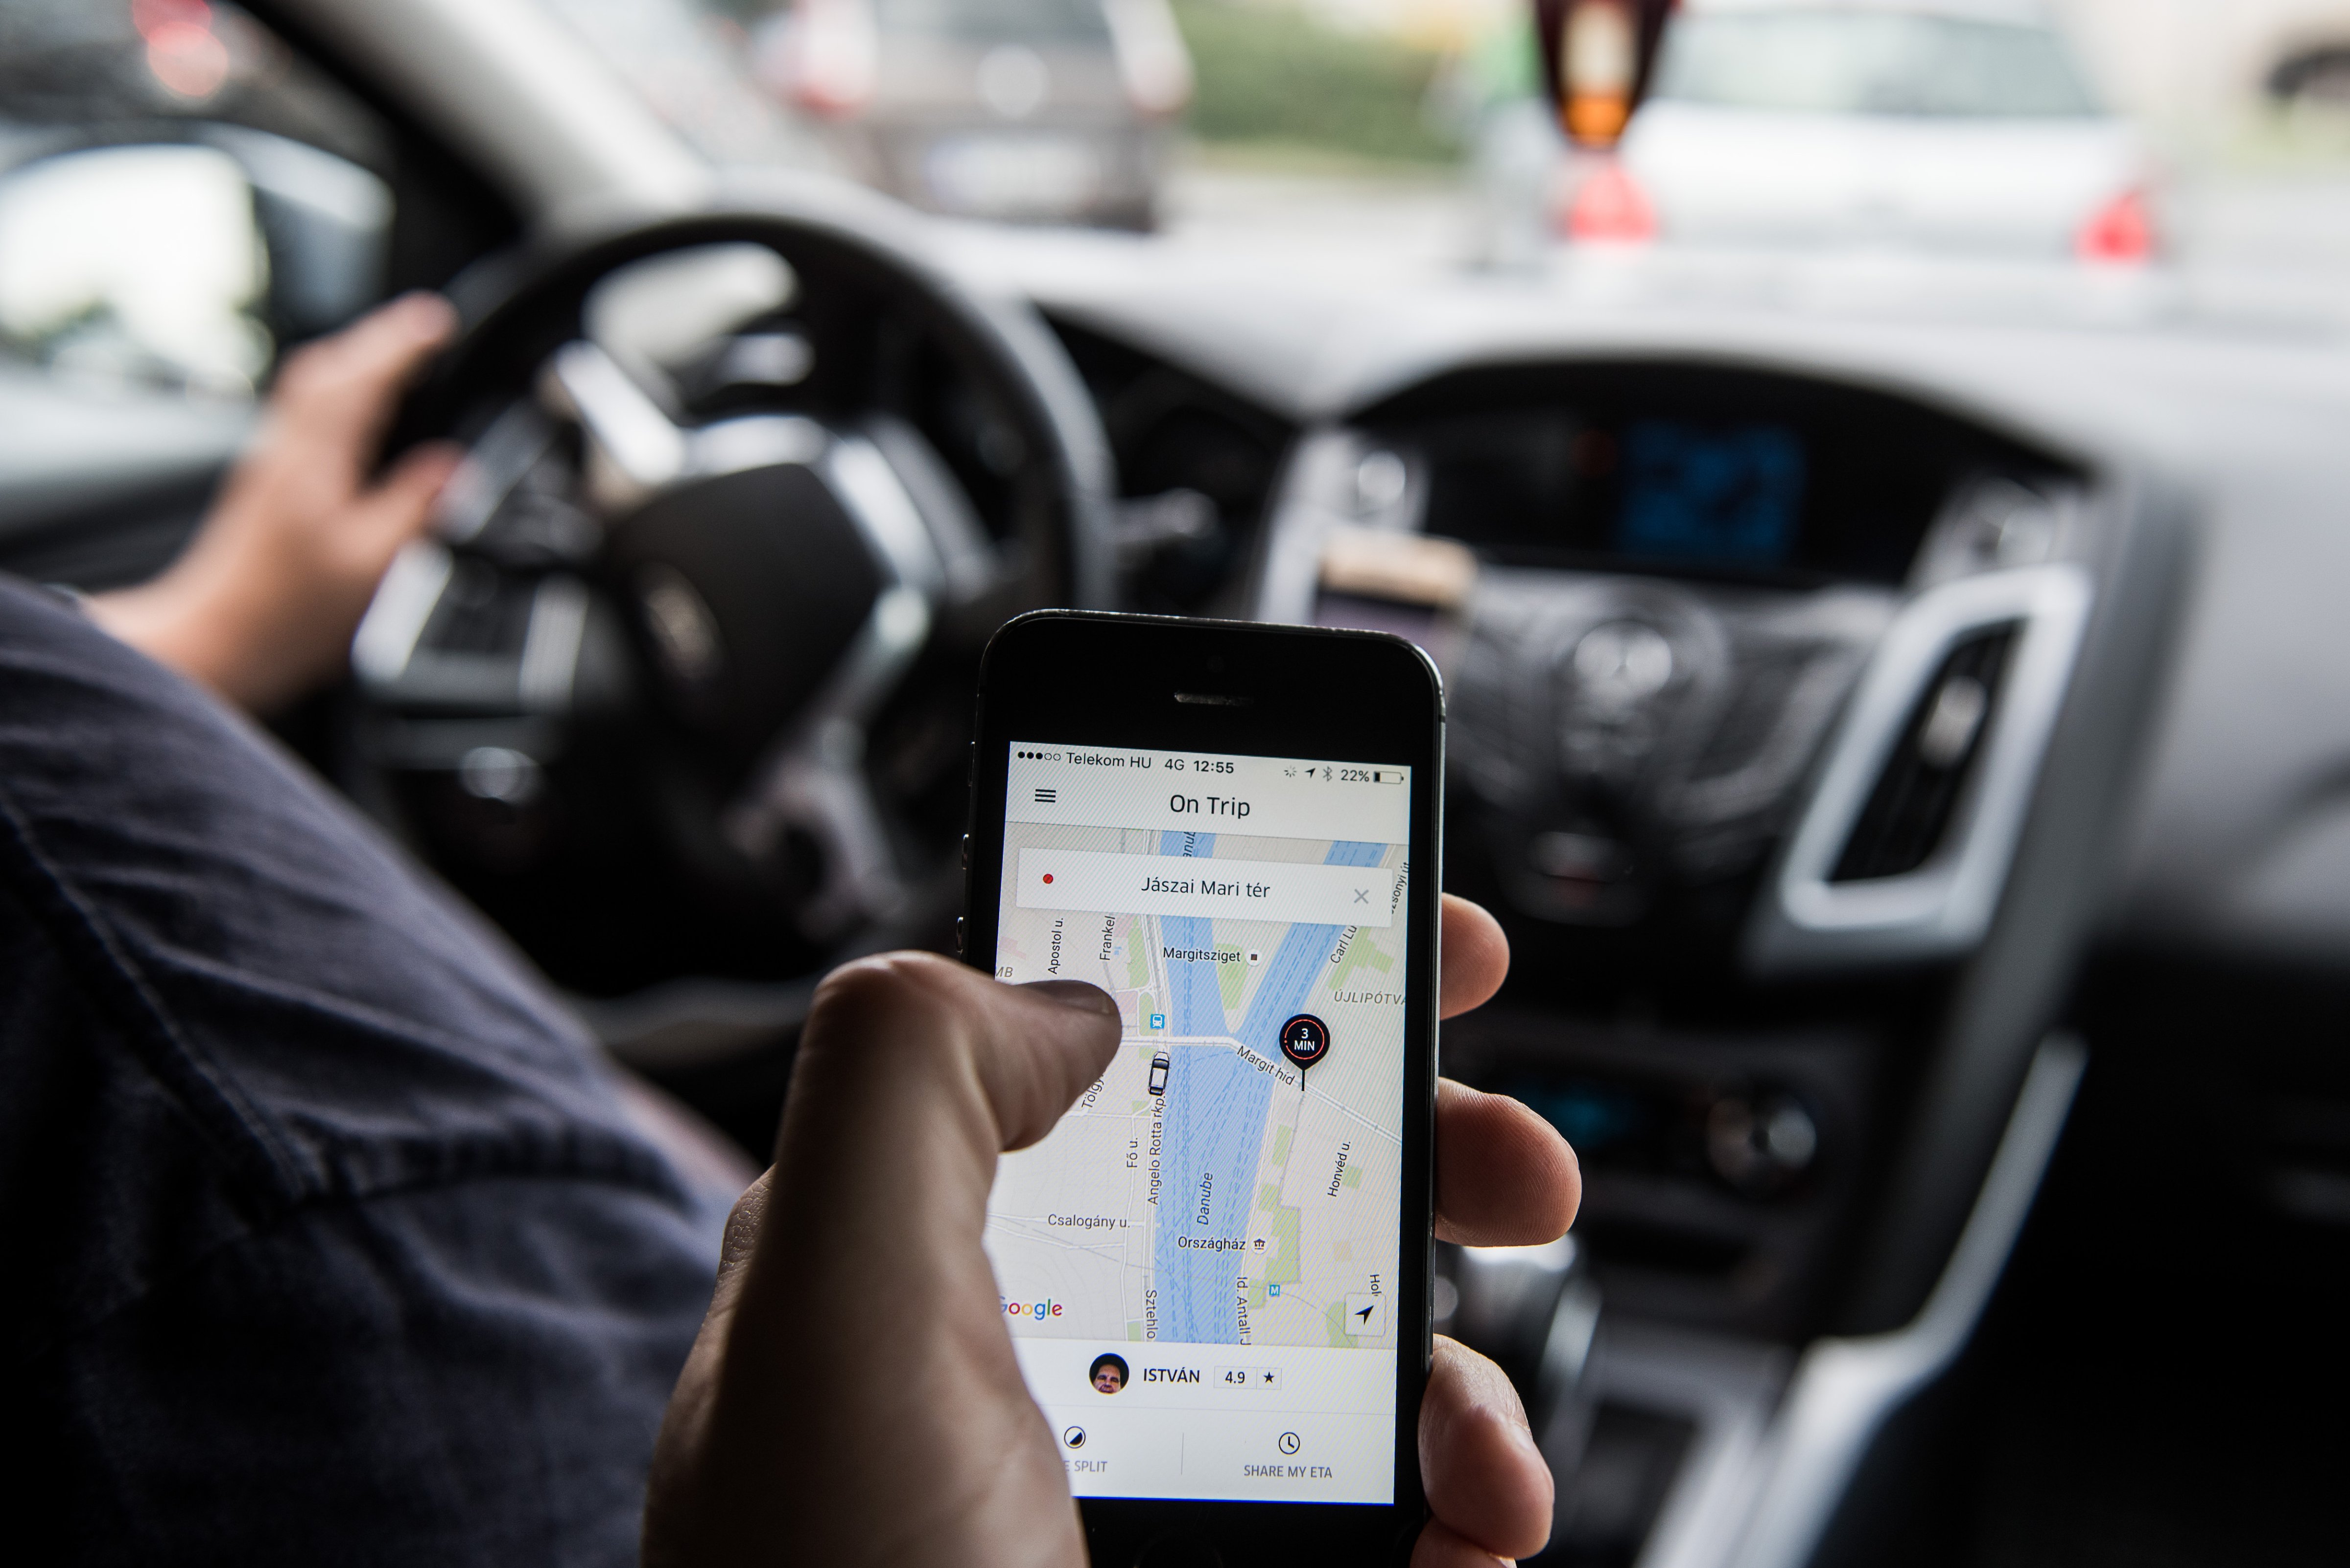 A passenger holds an iPhone displaying the Uber car service taxi application journey progress screen in Budapest, Hungary, on Wednesday, July 13, 2016. (Bloomberg via Getty Images)